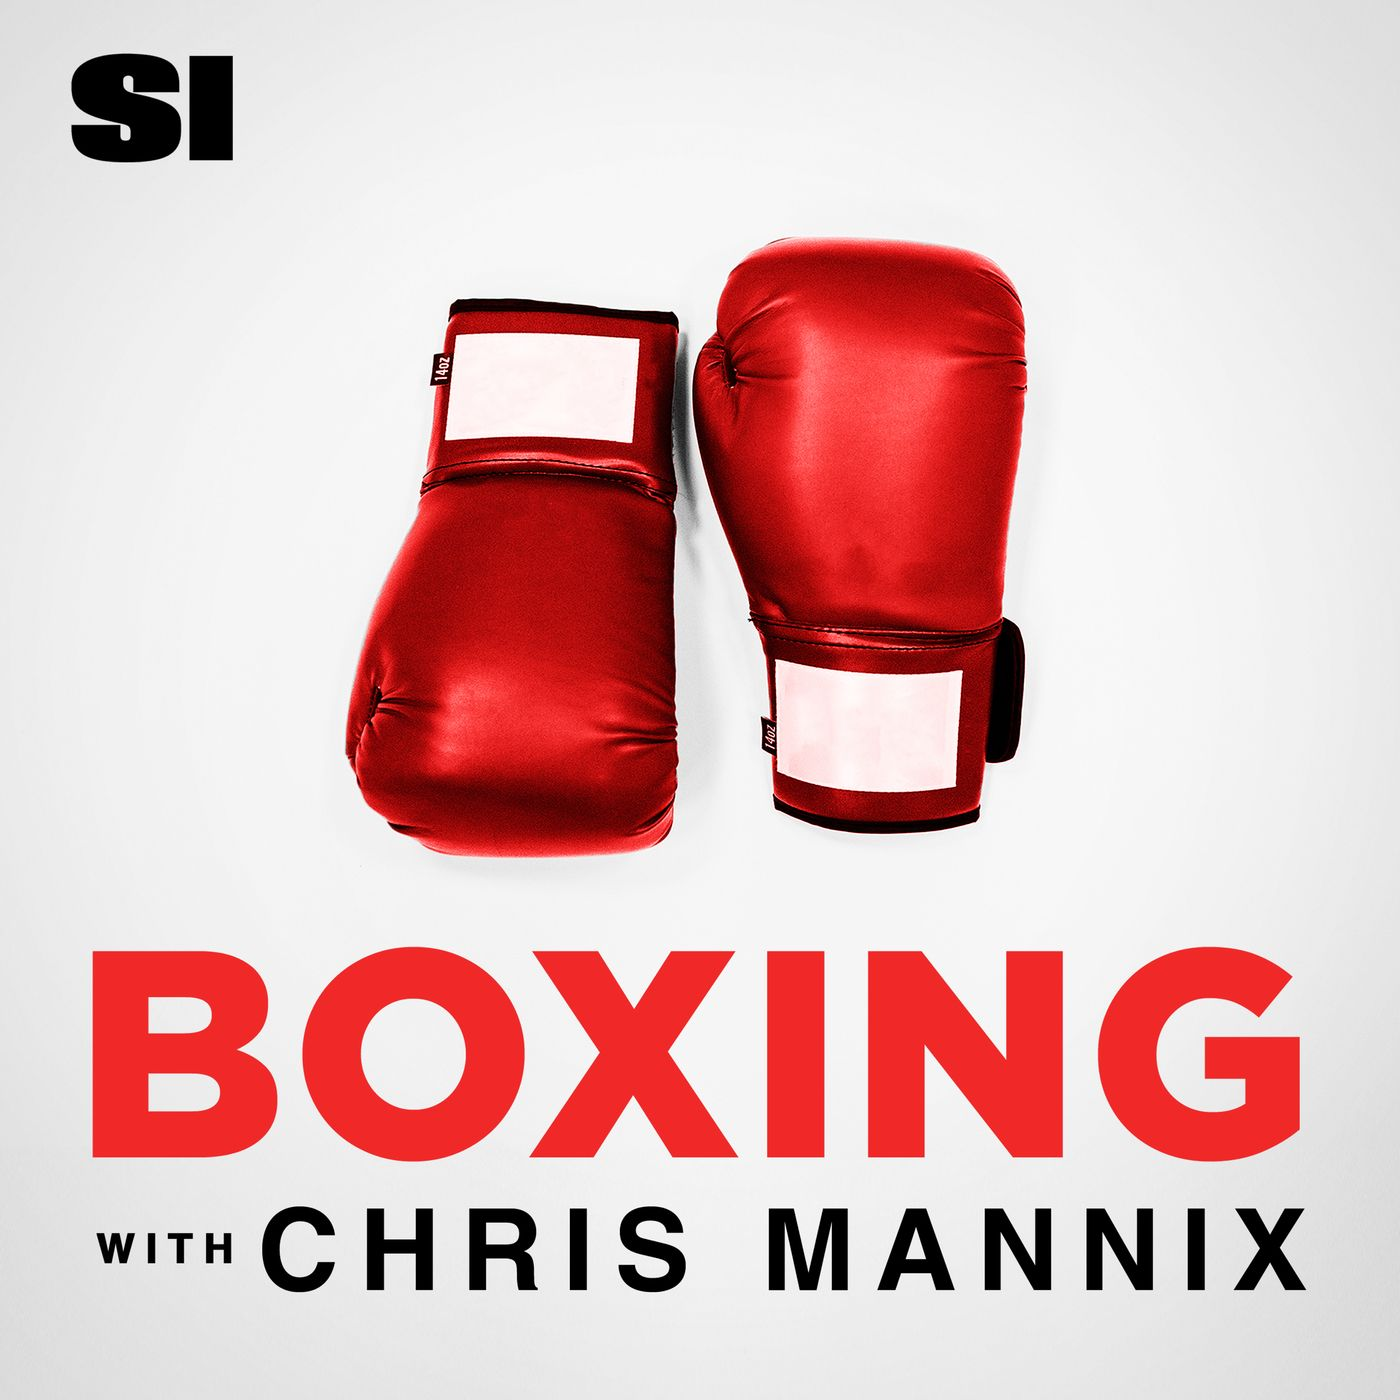 A highlight from Boxing with Chris Mannix - A Big Time in British Boxing